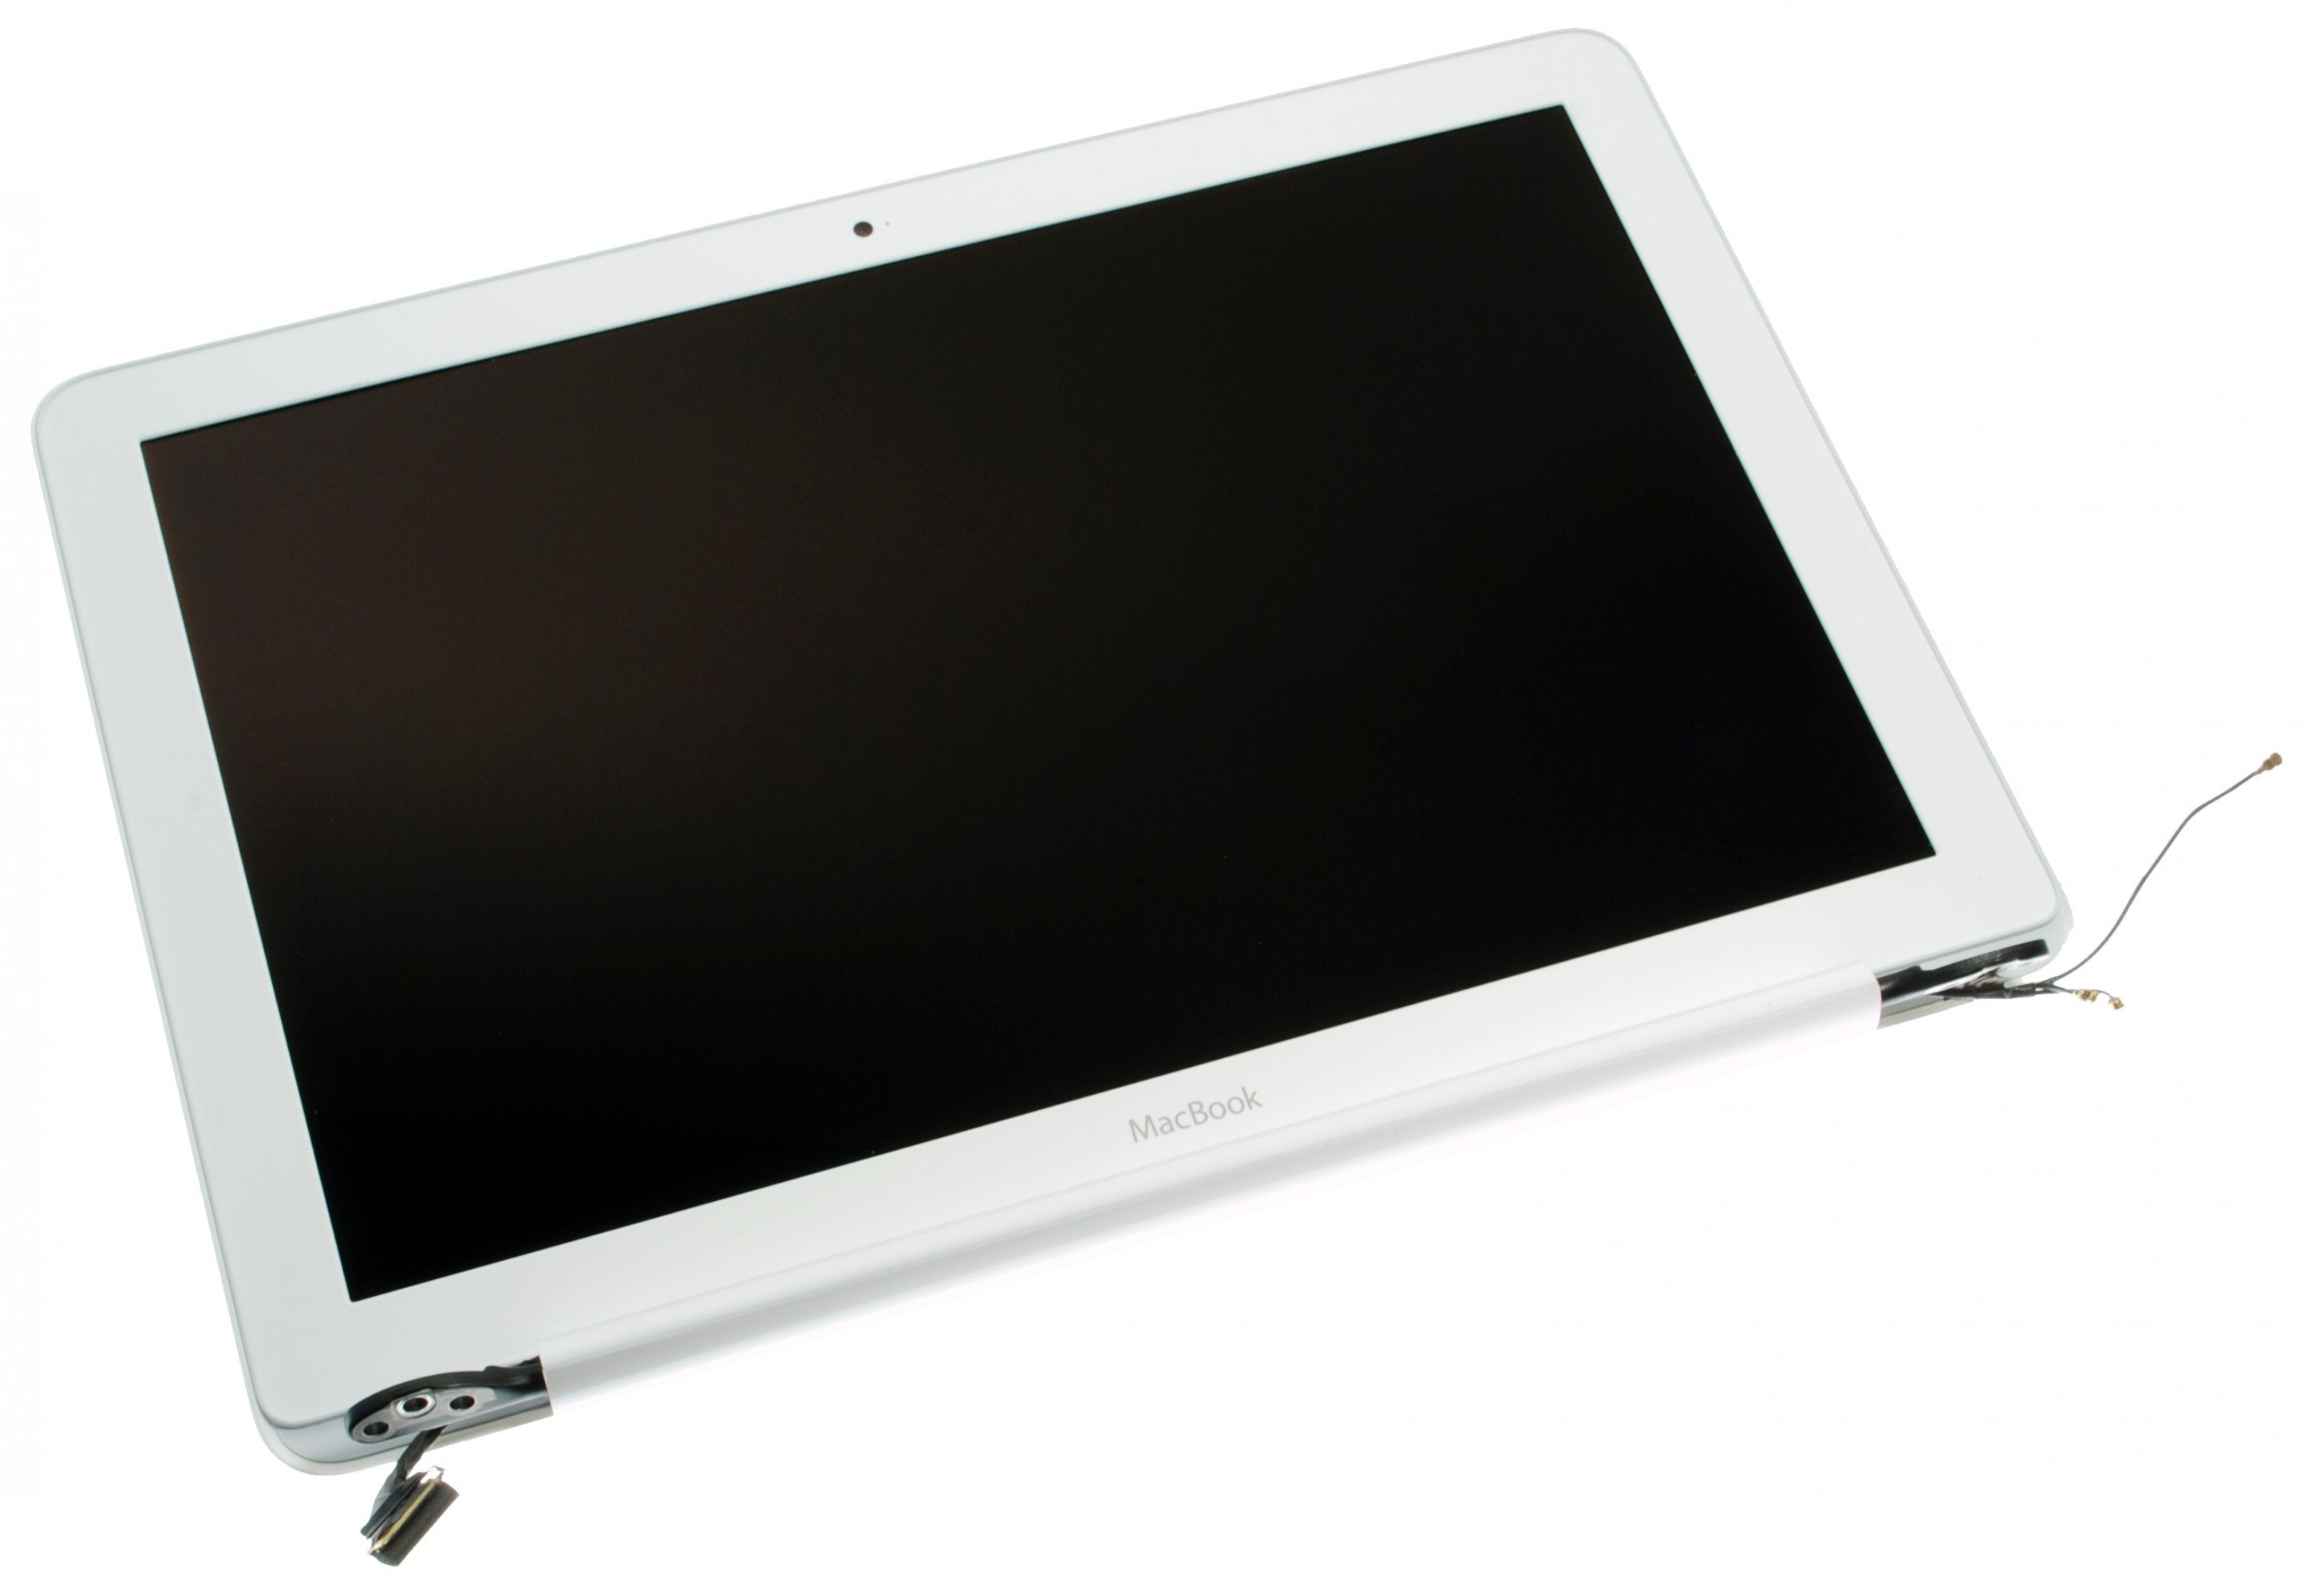 MacBook Unibody (A1342) Display Assembly